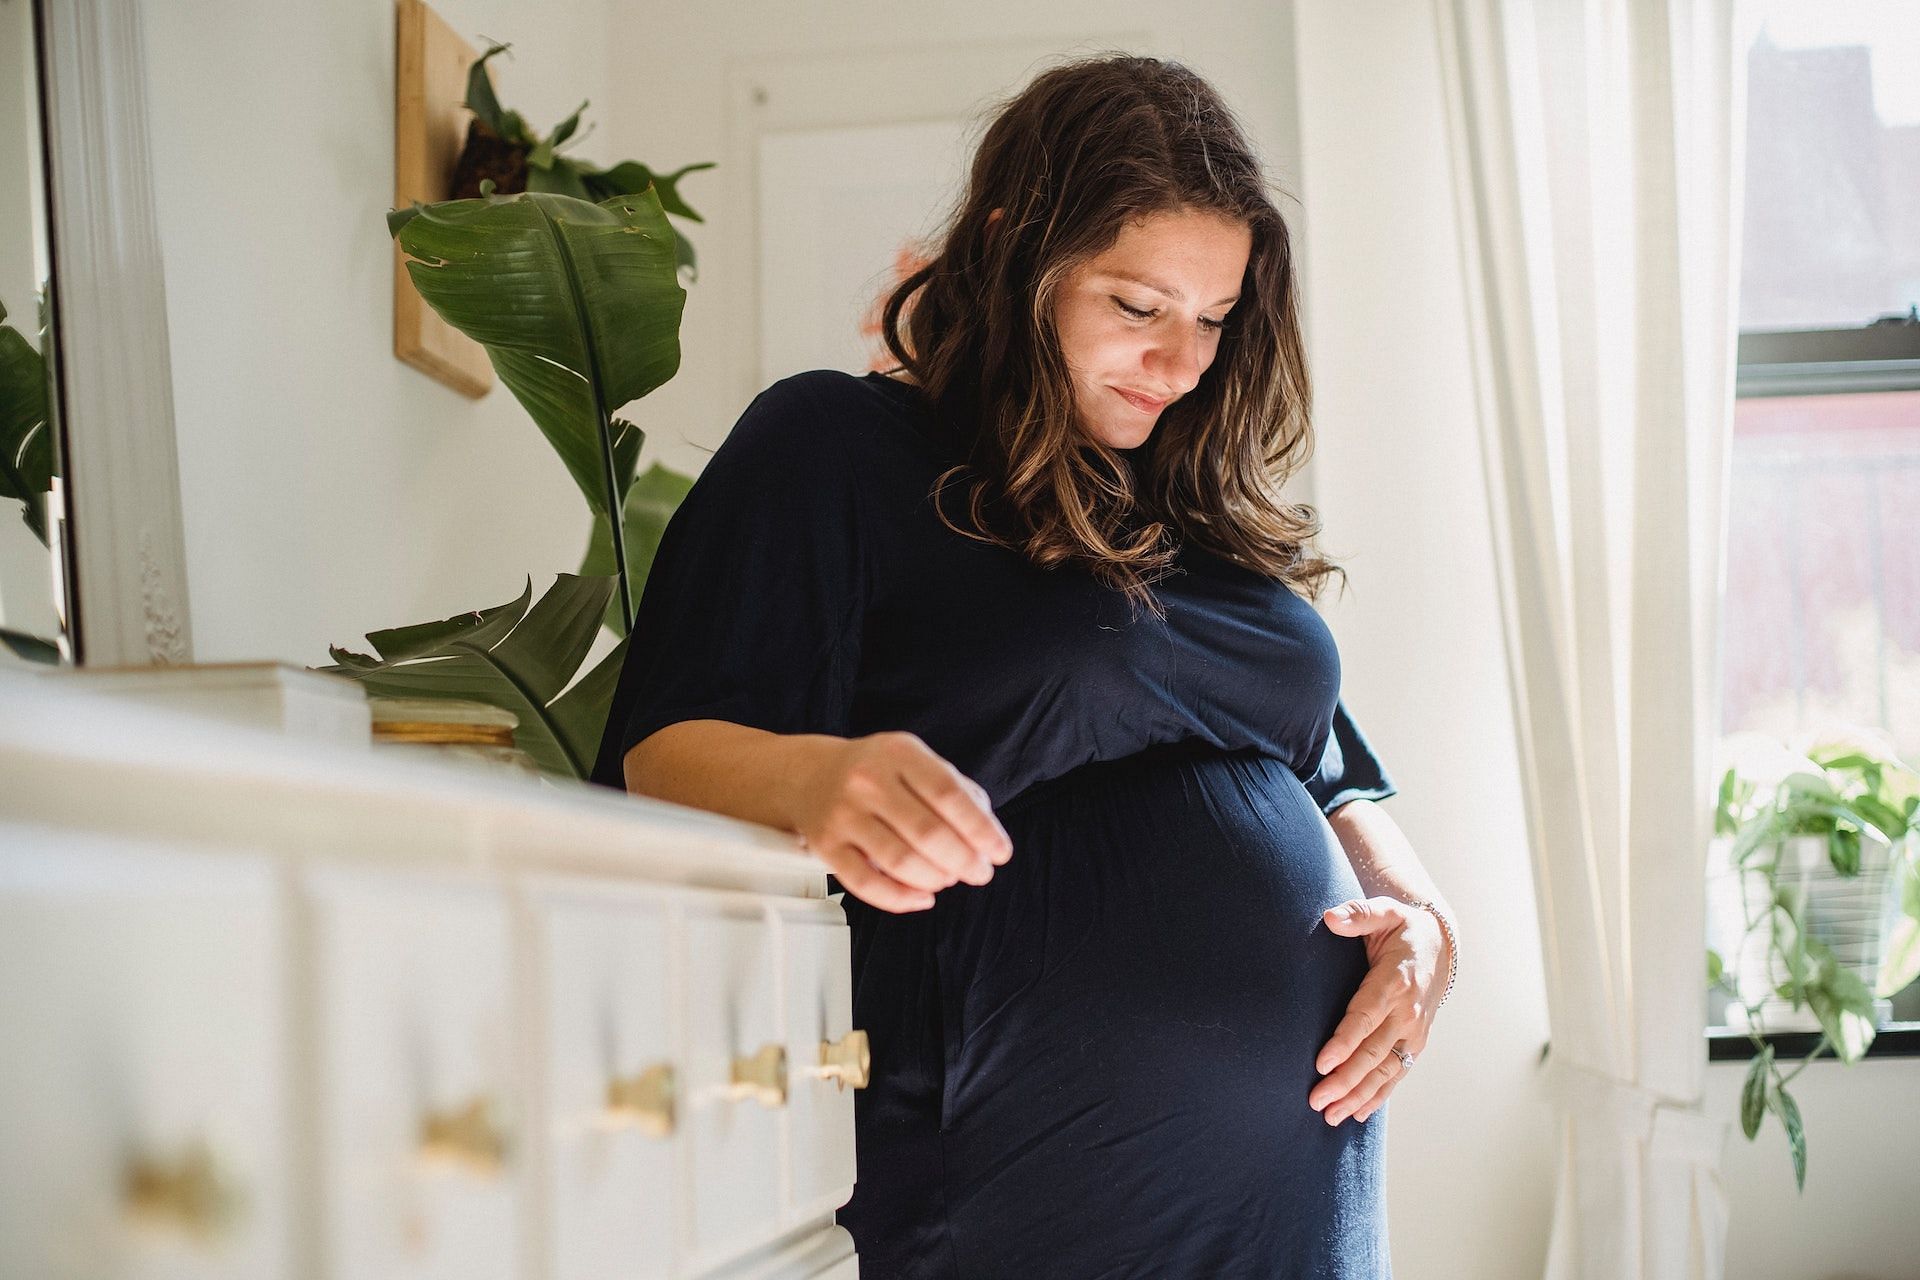 Pregnancy is one of the most likely causes of periods getting shorter and lighter. (Photo via Pexels/Amina Filkins)